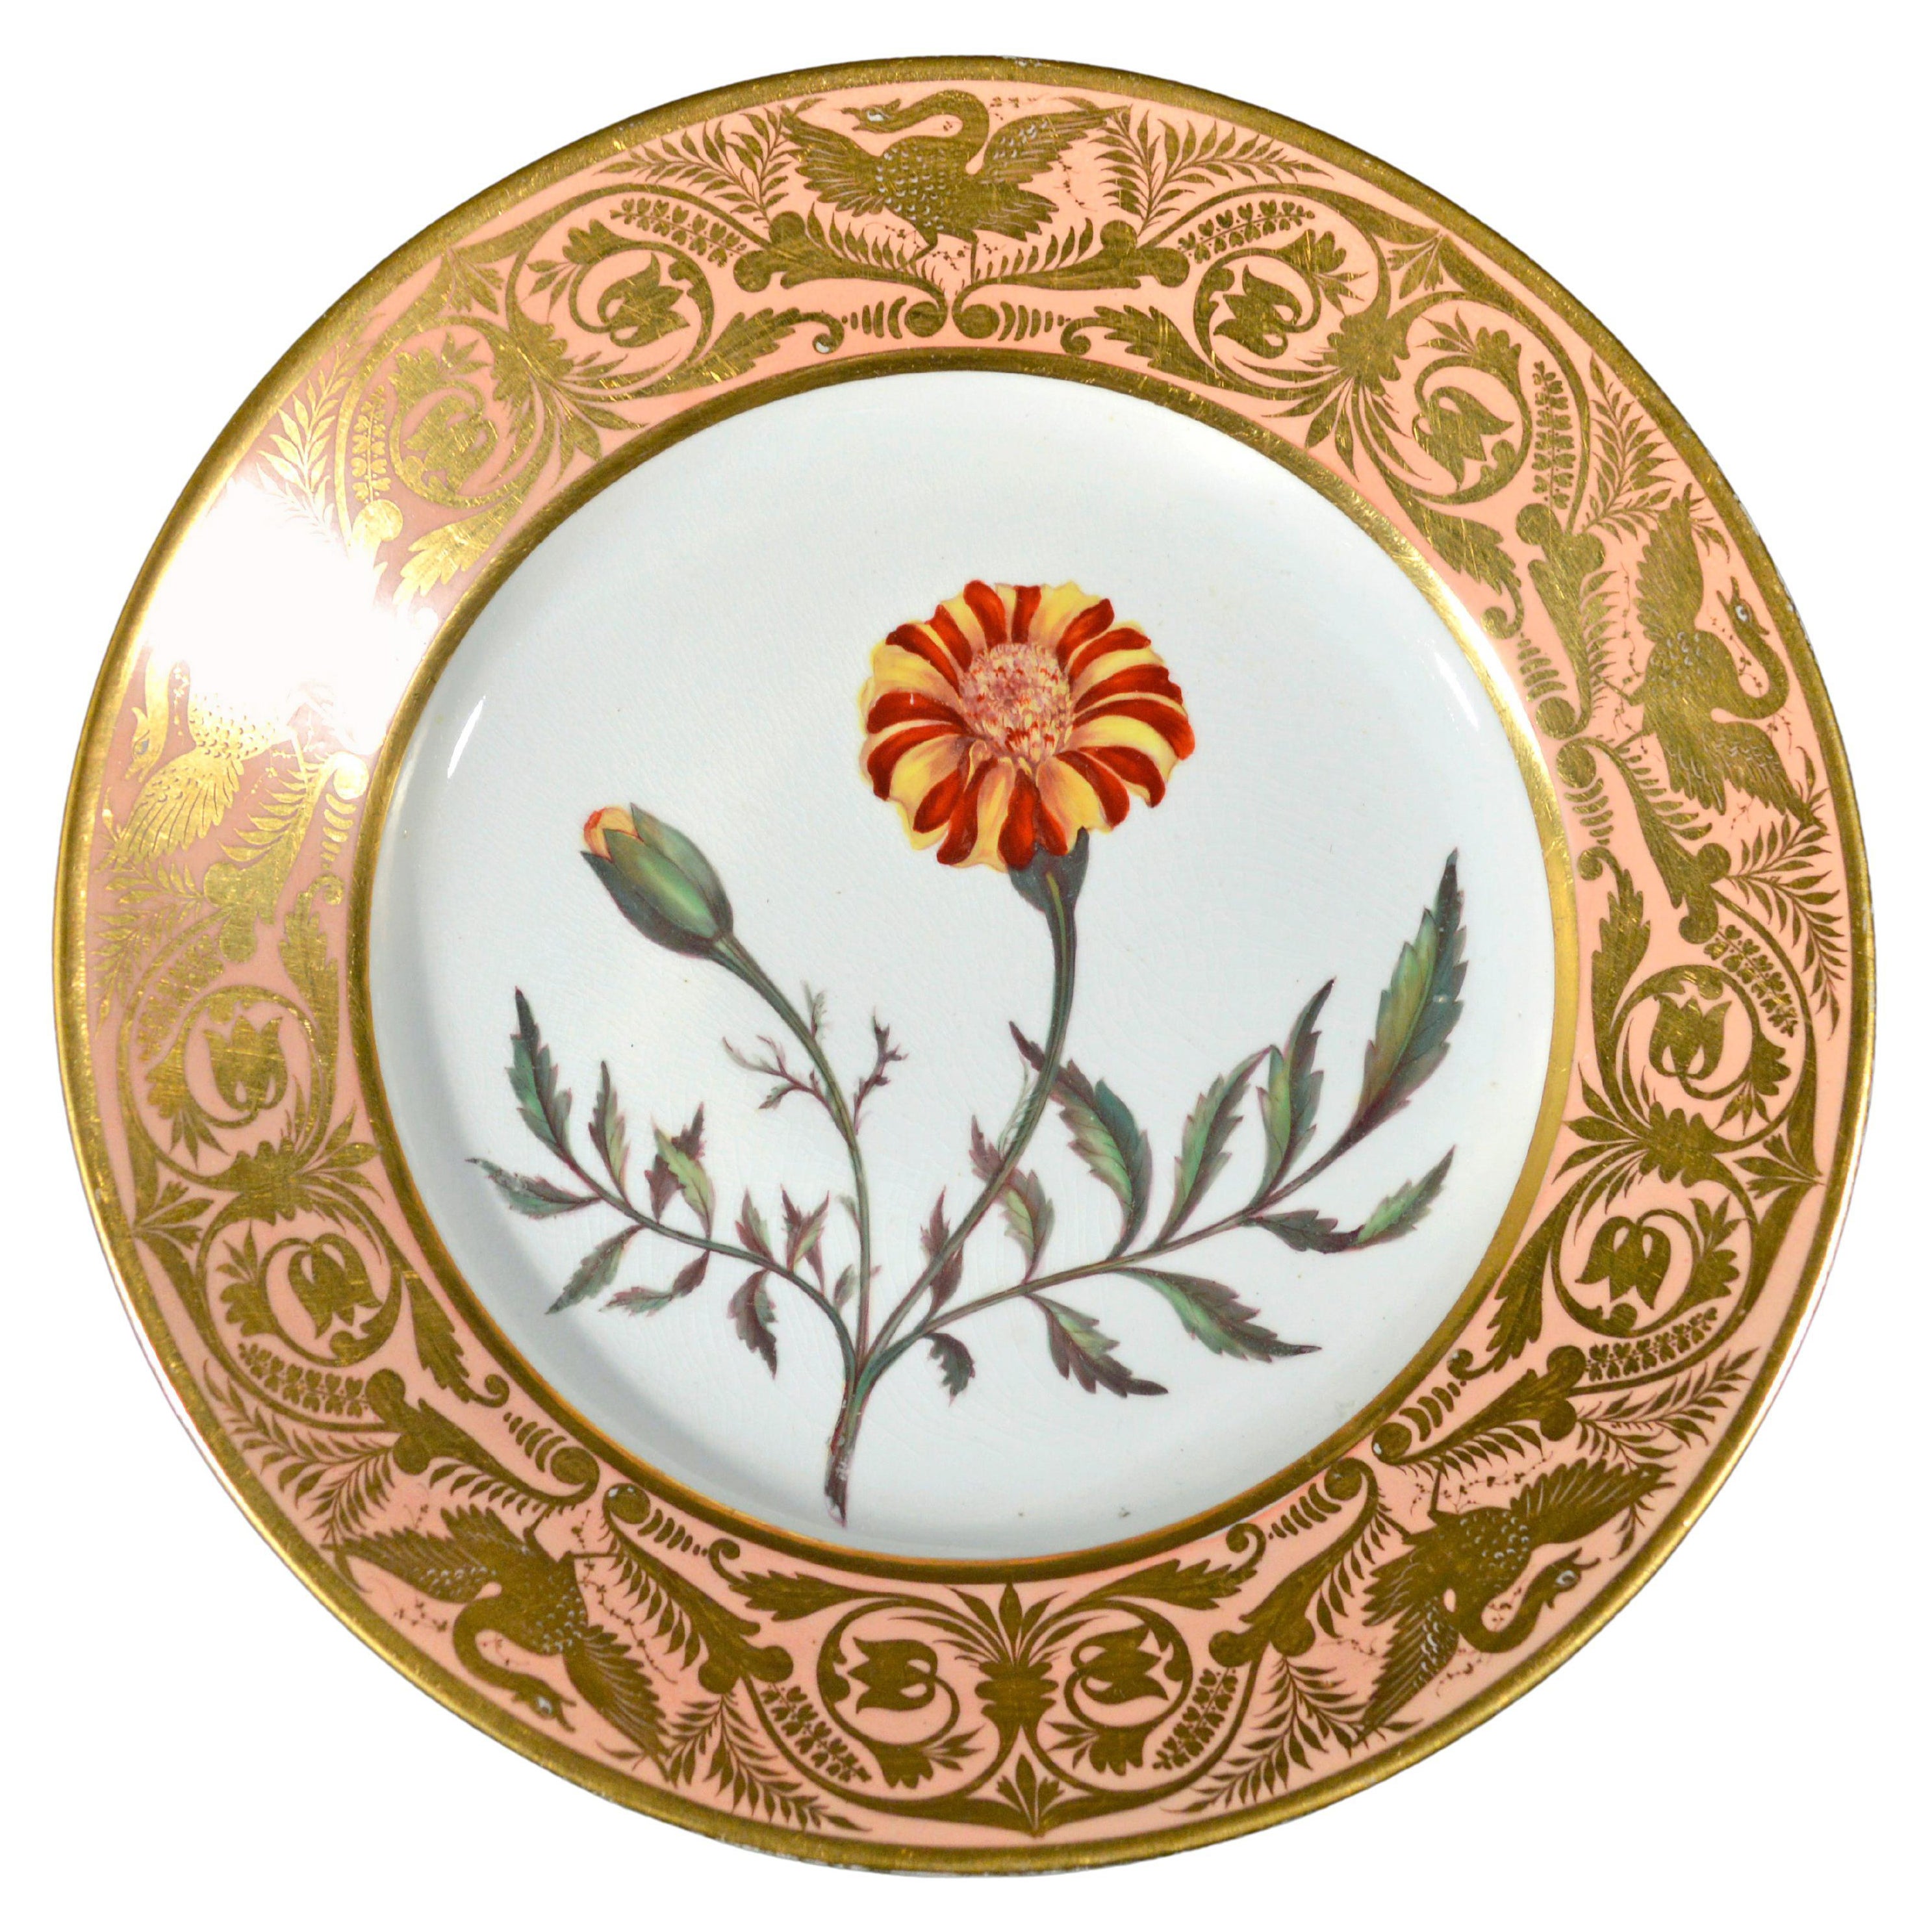 Antique Derby Porcelain Botanical Salmon-Ground Plate, French Marigold